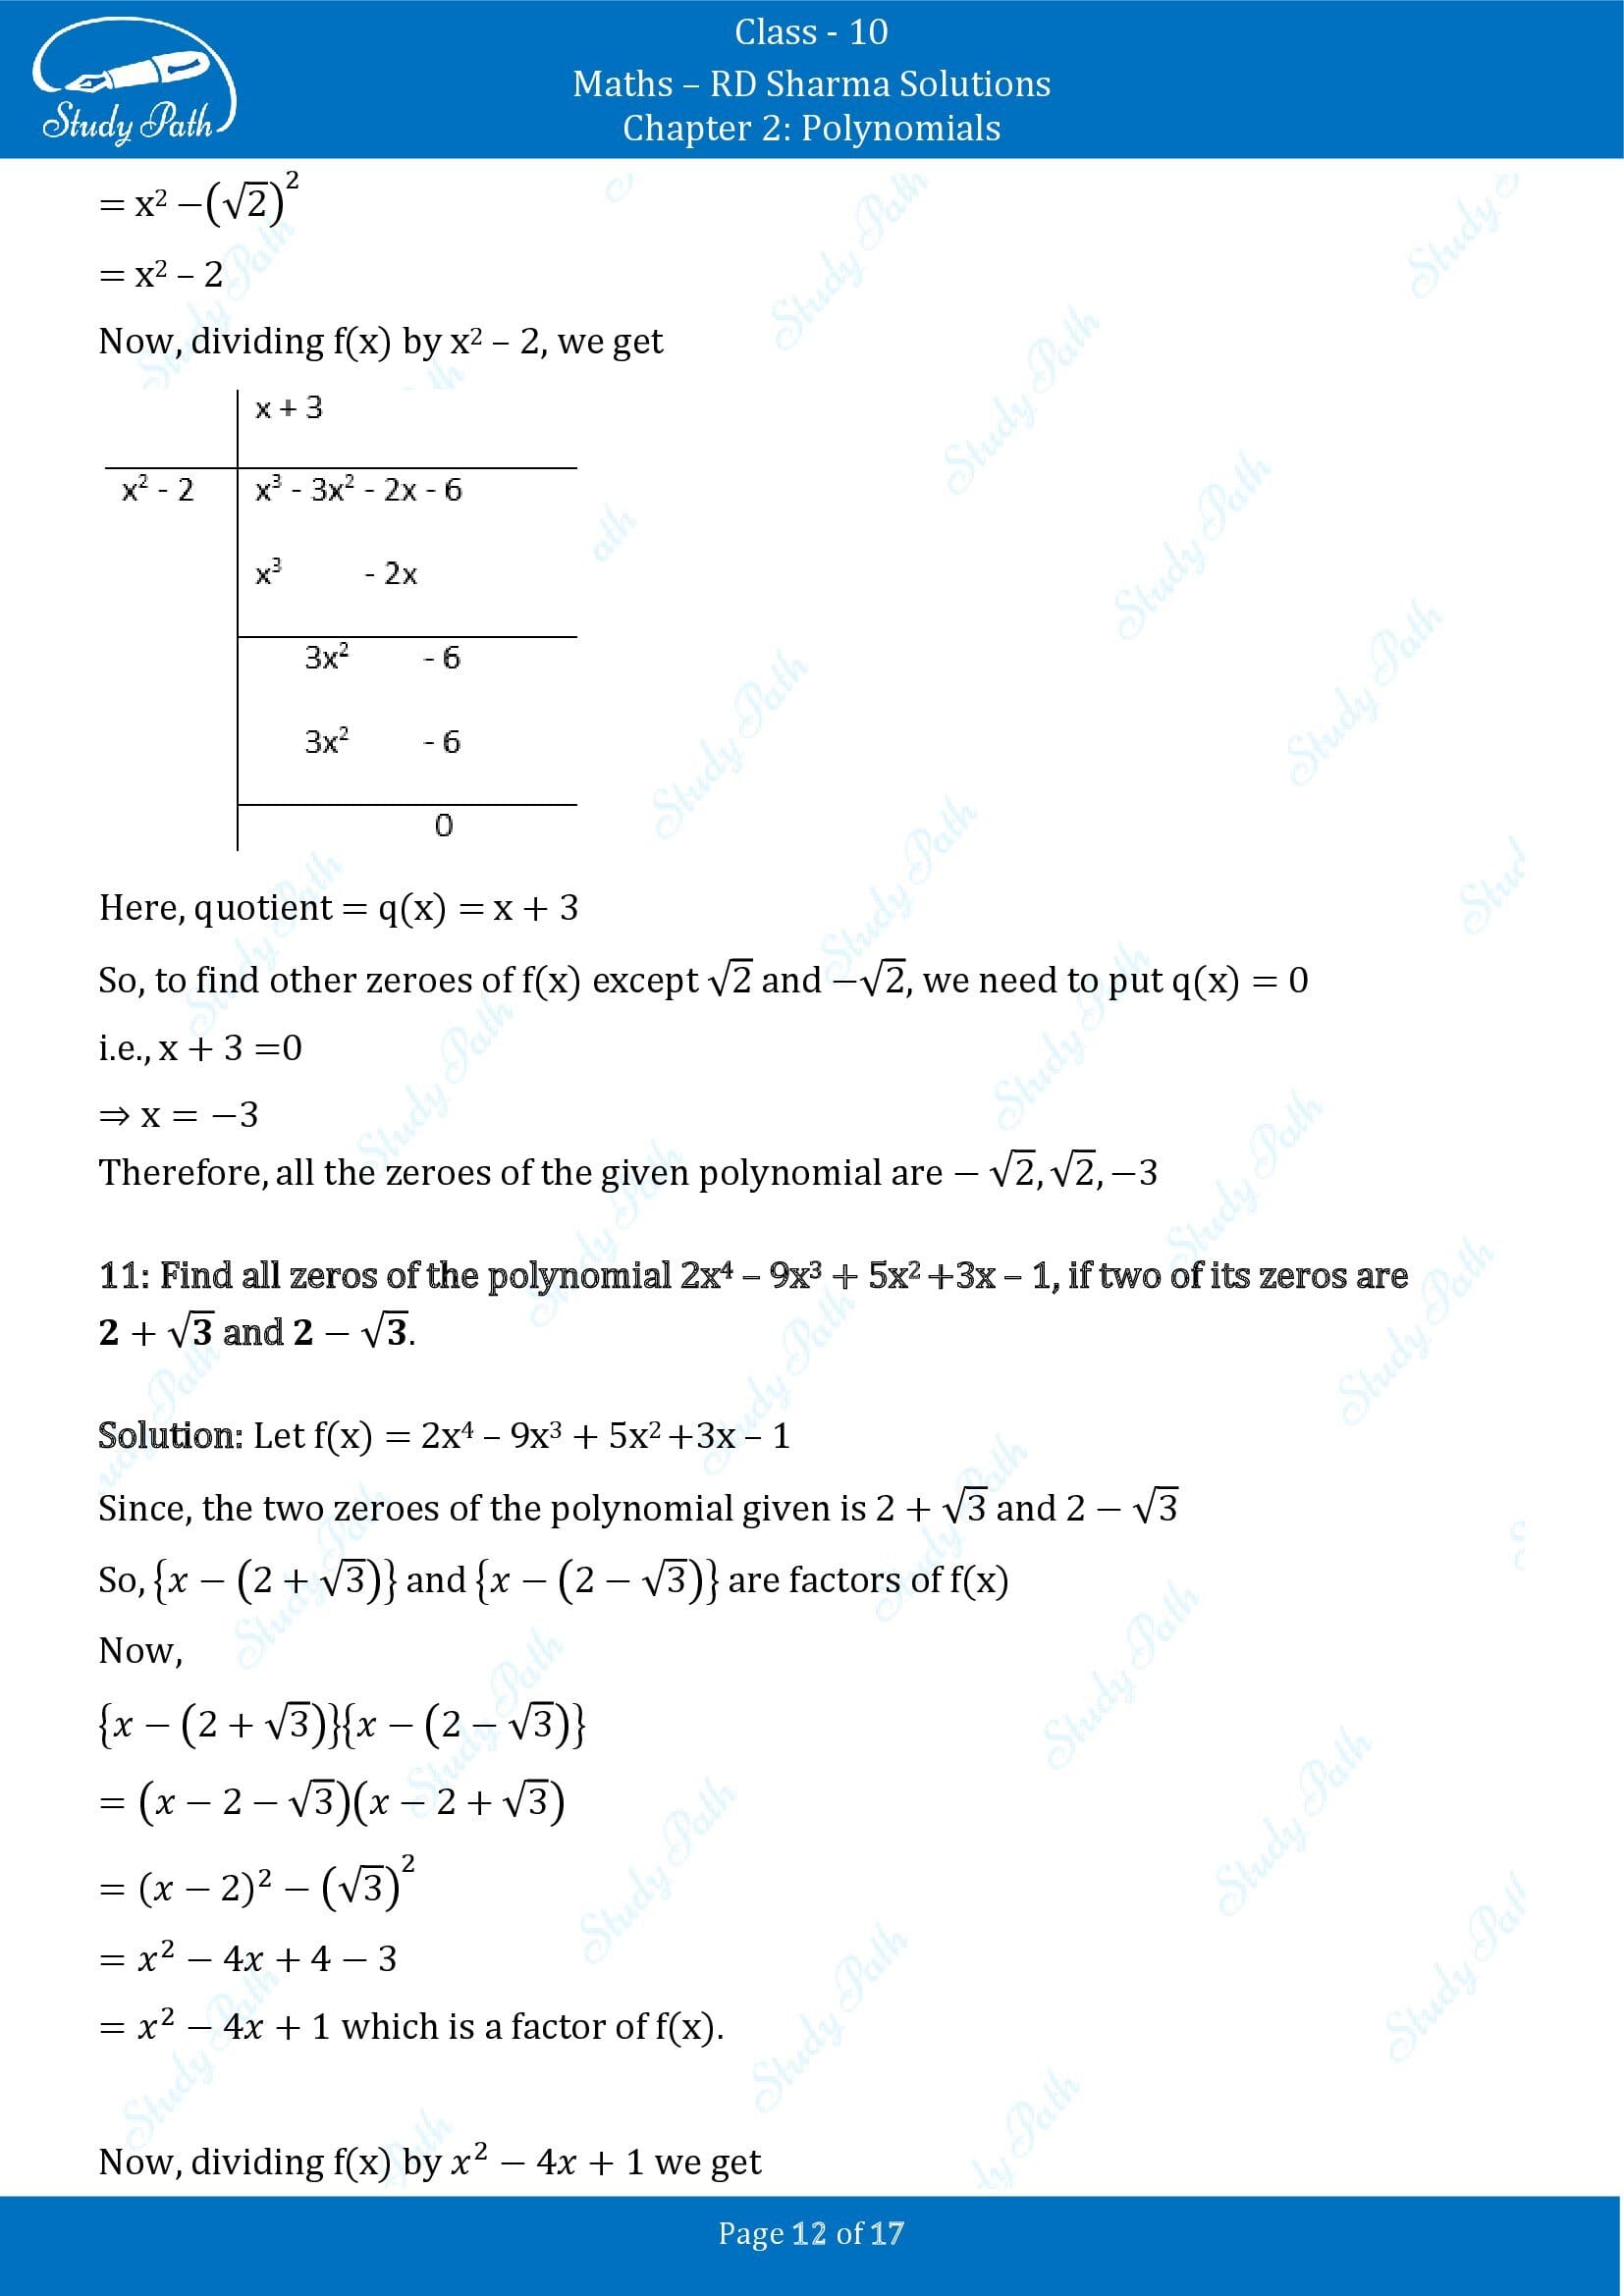 RD Sharma Solutions Class 10 Chapter 2 Polynomials Exercise 2.3 00012